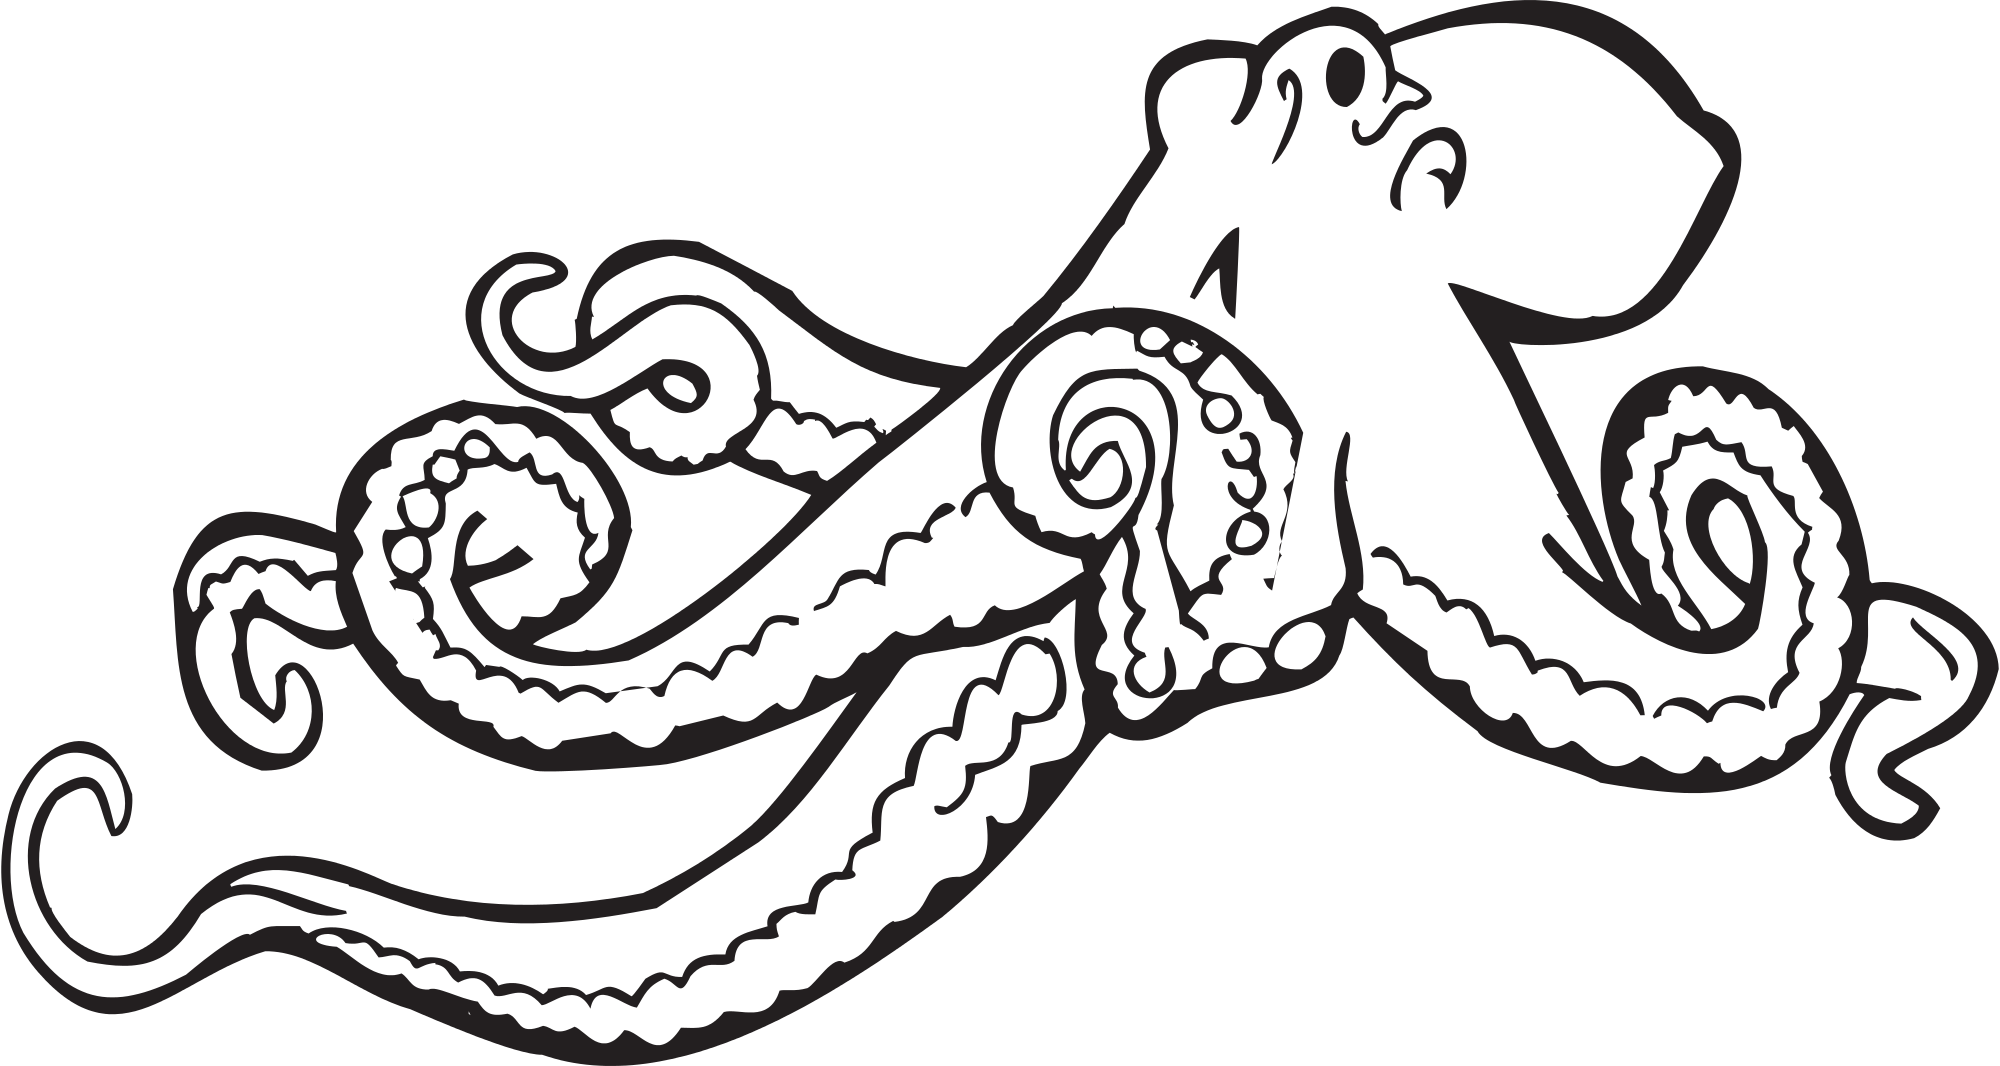 File:Octopus clipart.svg